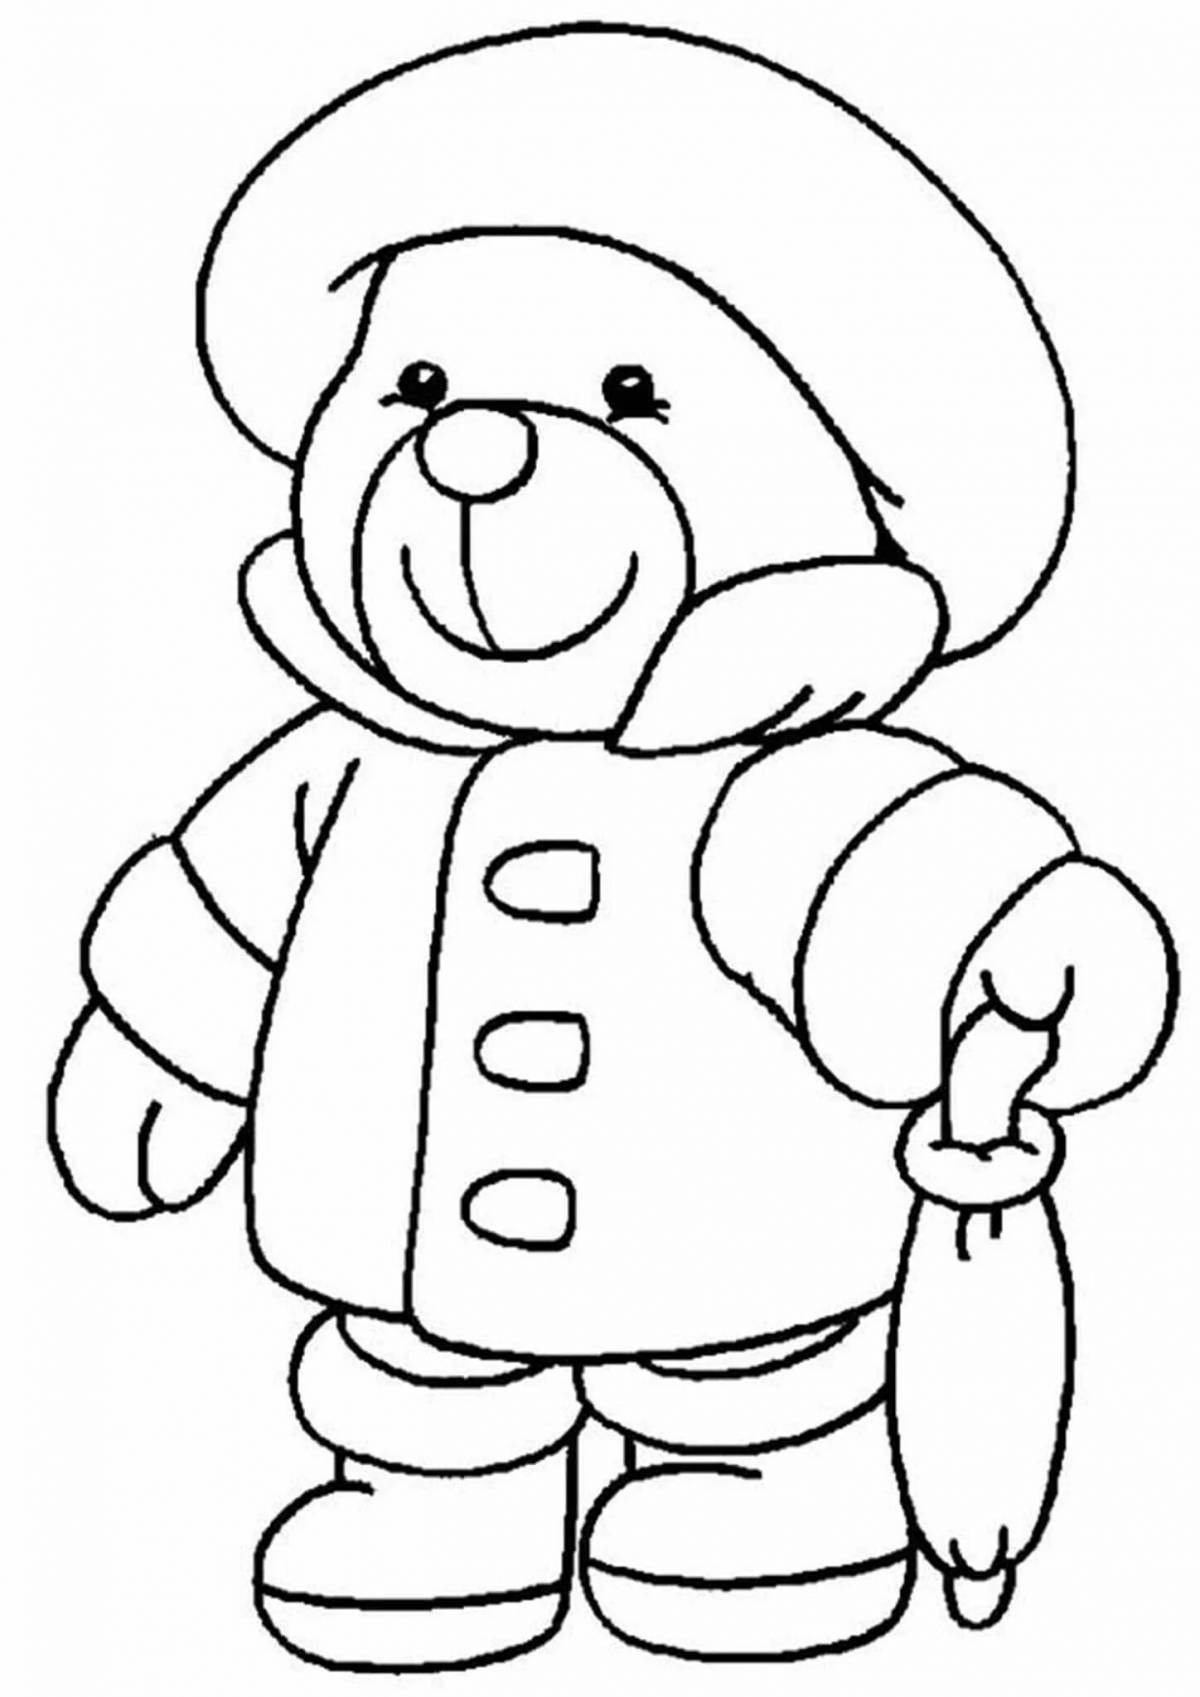 Coloring soft teddy bear in baby pants